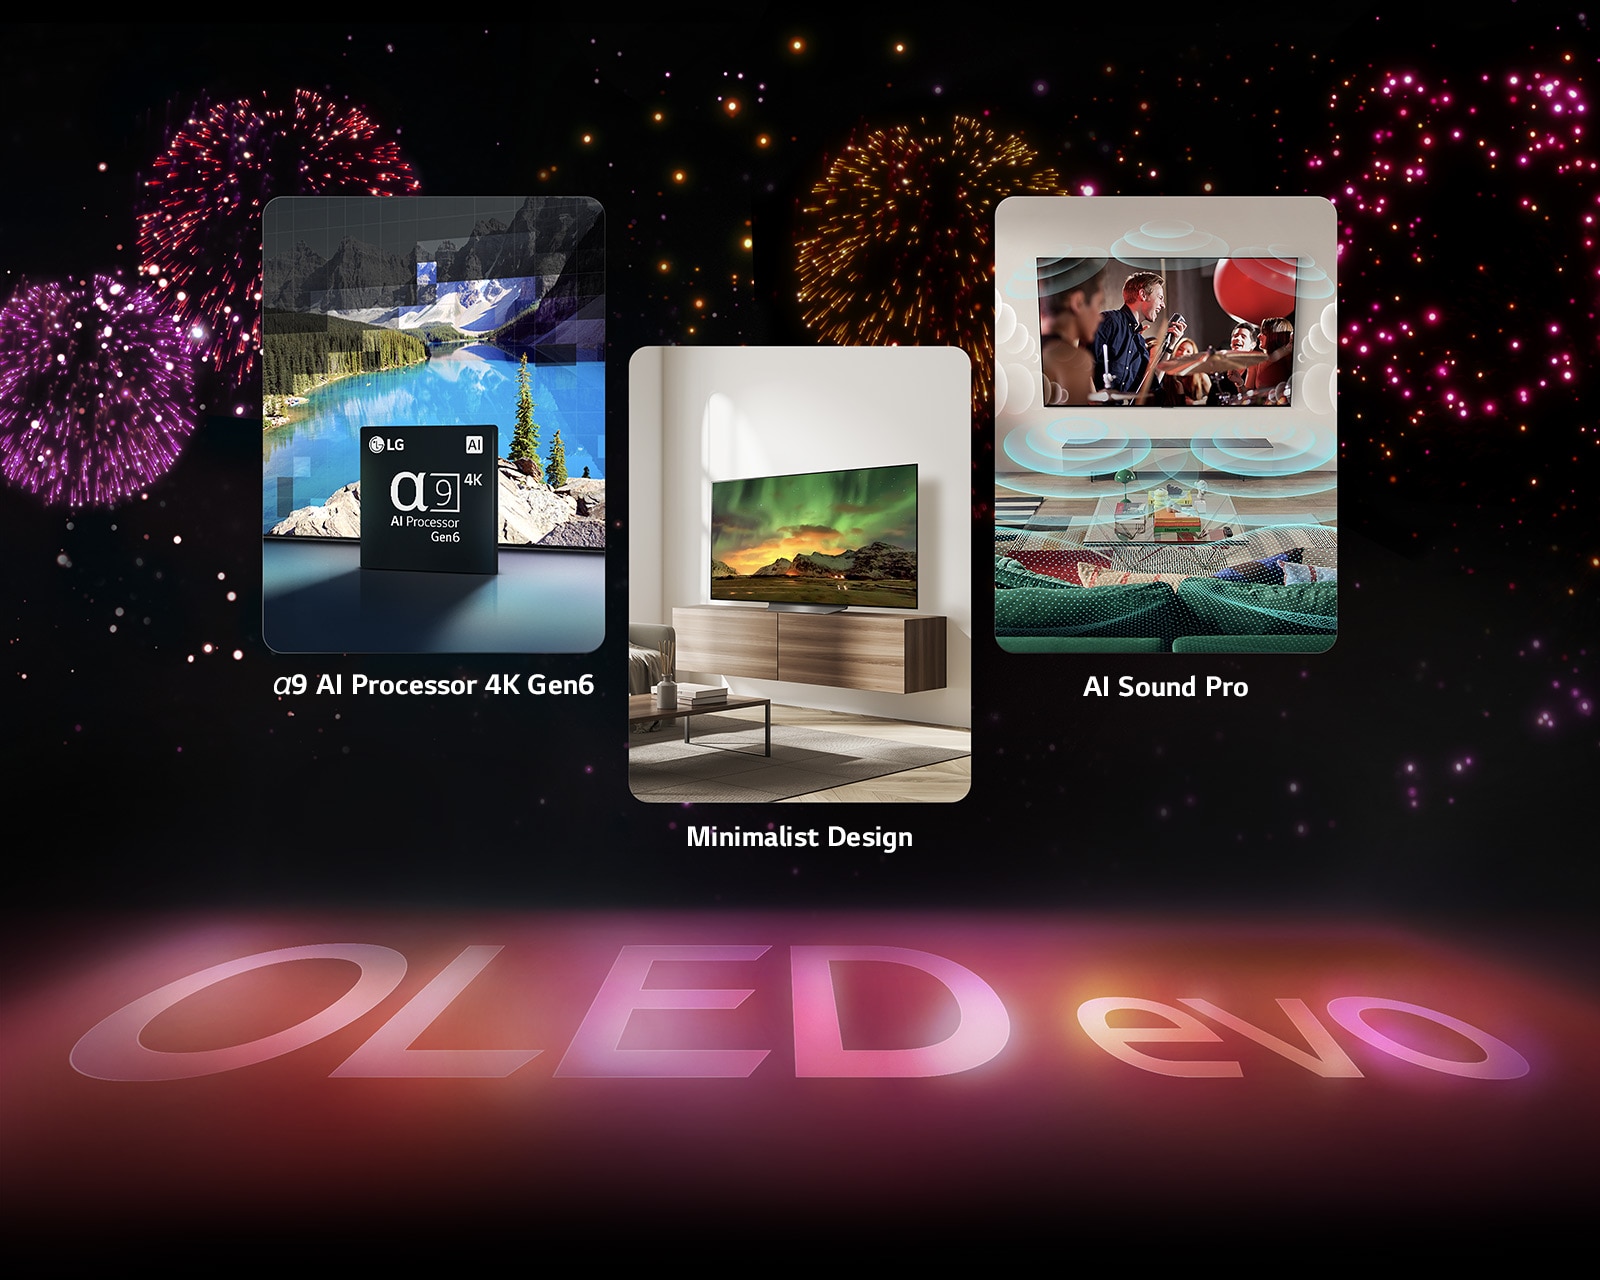 An image presenting the key features of the LG OLED evo CS3 against a black background with a pink and purple firework display. The pink reflection from the firework display on the ground shows the words "OLED evo." Within the picture, an image depicting the α9 AI Processor 4K Gen6 shows the chip standing before a picture of a lake scene being remastered with the processing technology. An image presenting Minimalist Design shows the TV on a stand in a living room. An image presenting AI Sound Pro shows a rock show playing on the TV with music bubbles depicting soundwaves filling the living space.